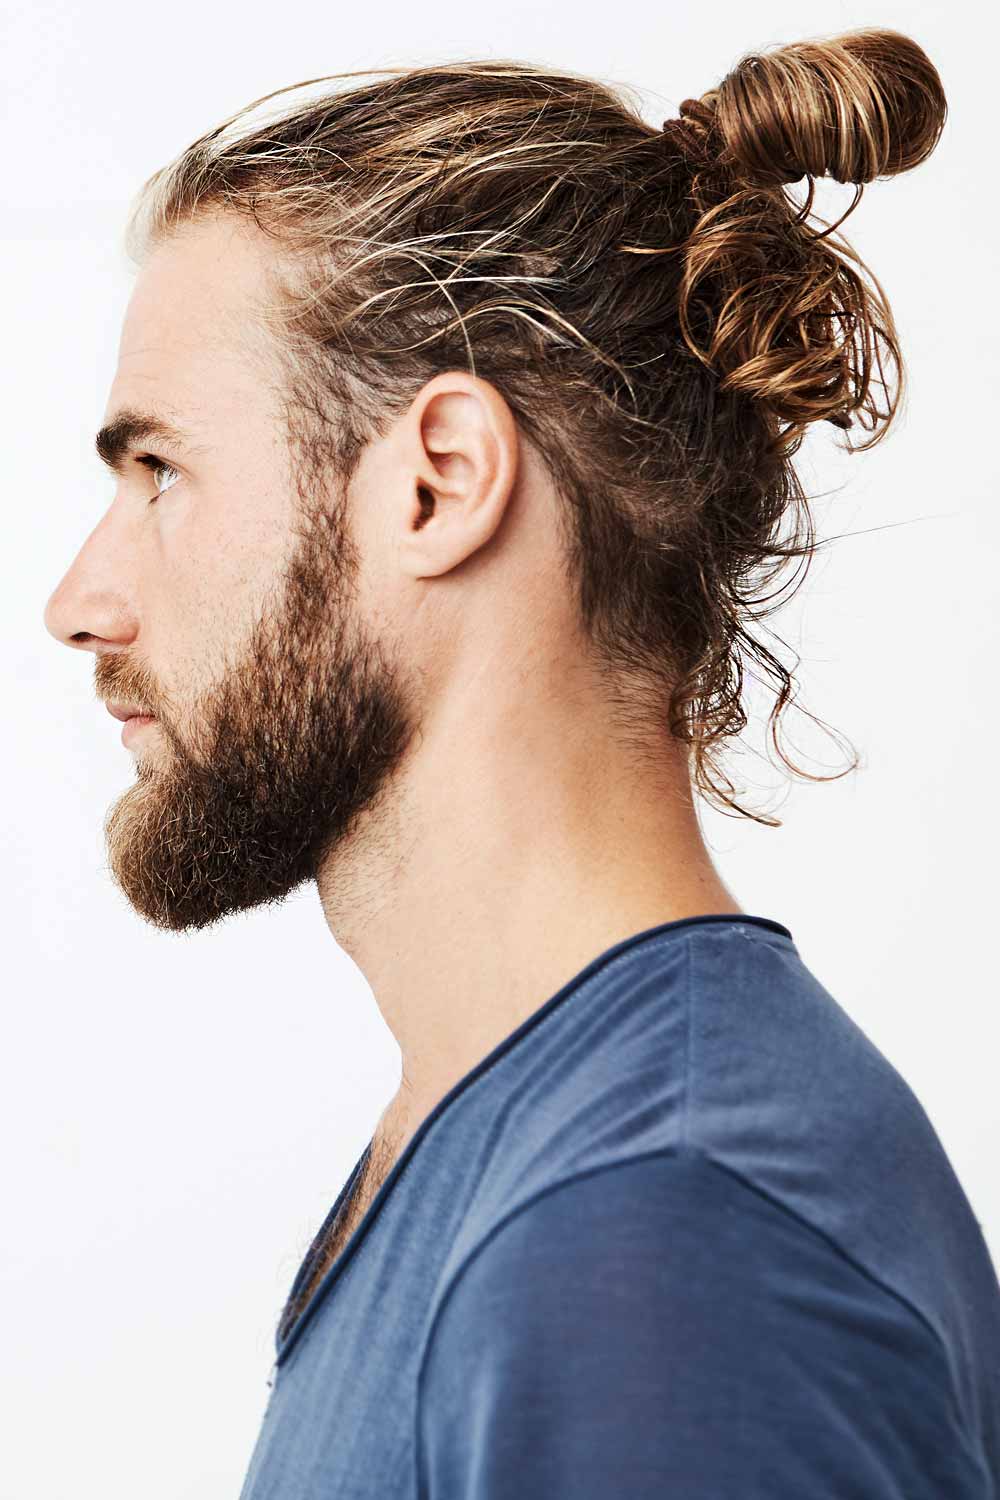 50 Trendy Undercut Hair Ideas for Men to Try Out